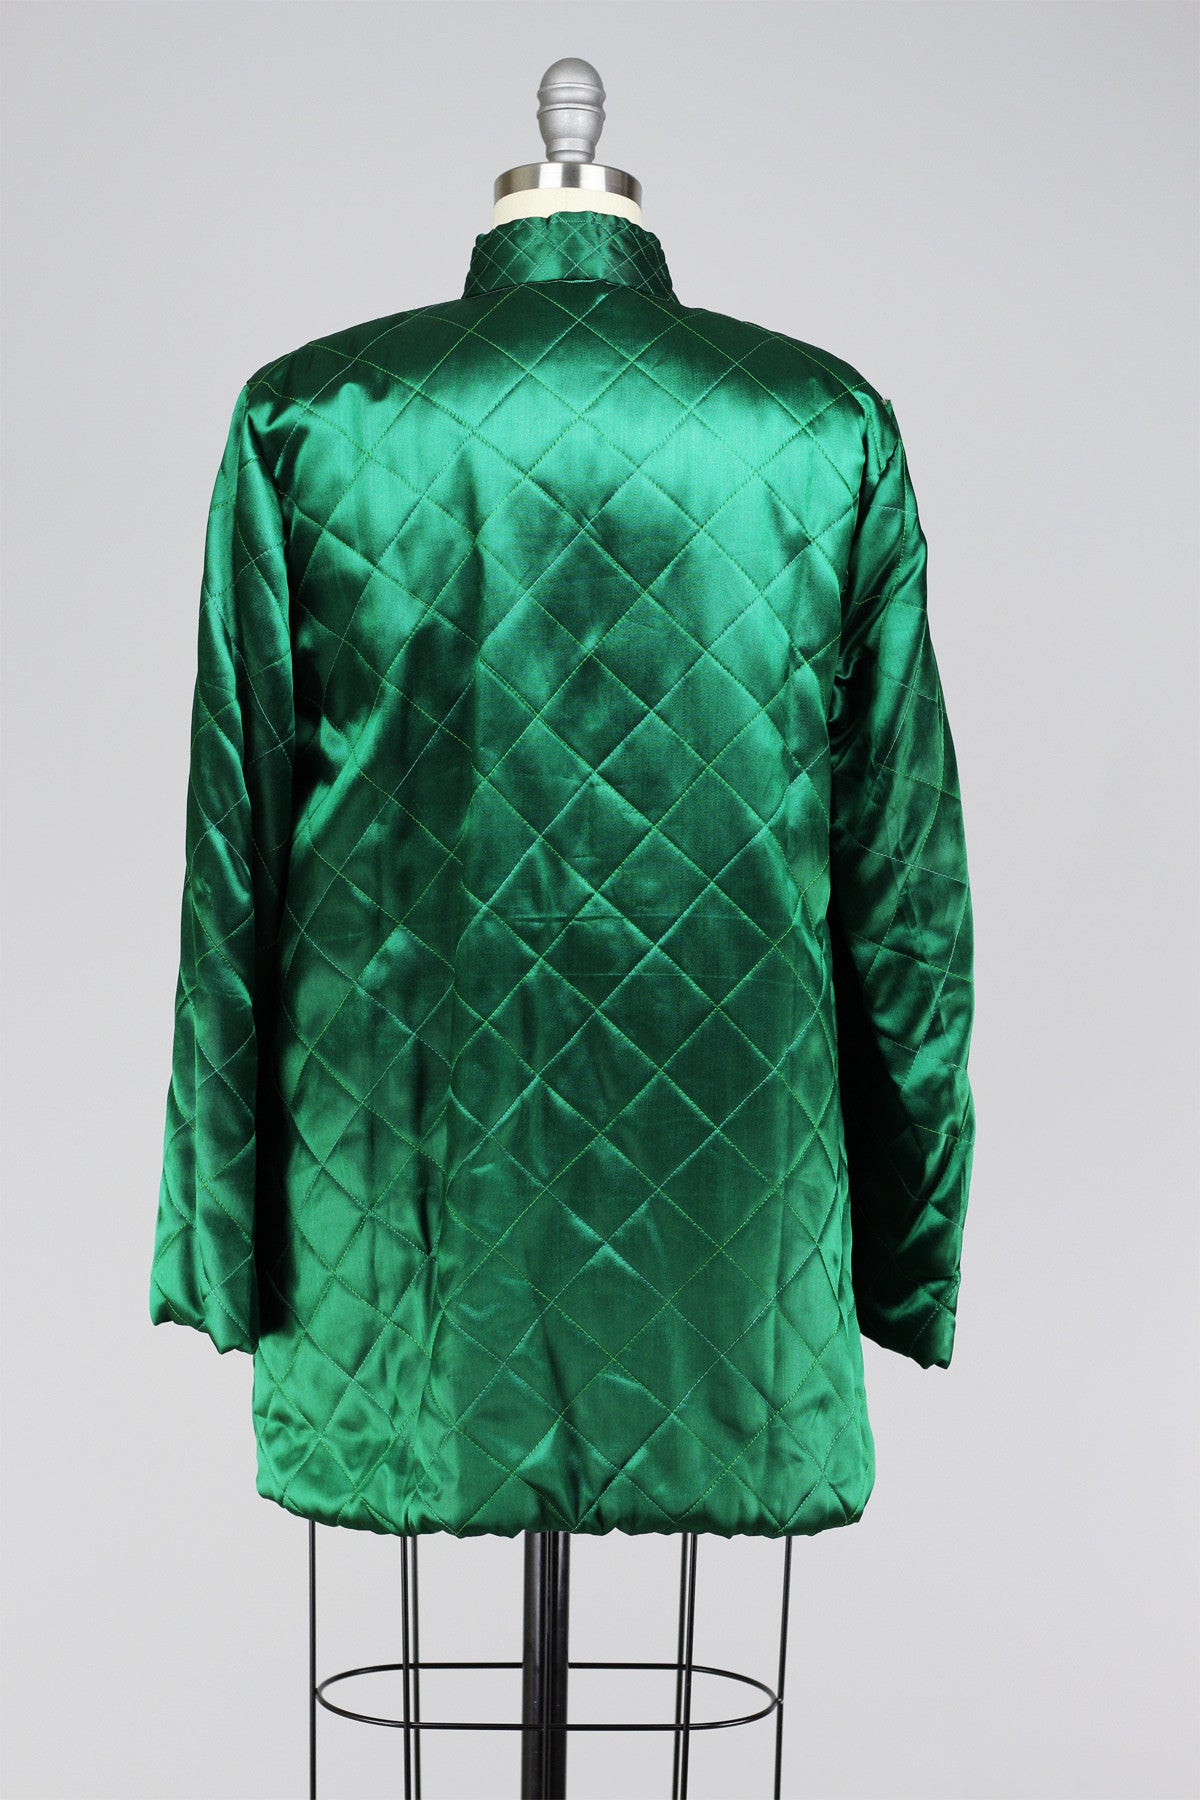 Rare 1940s 50s Vintage Emerald Green Quilted Satin Embroidered Asian Jacket